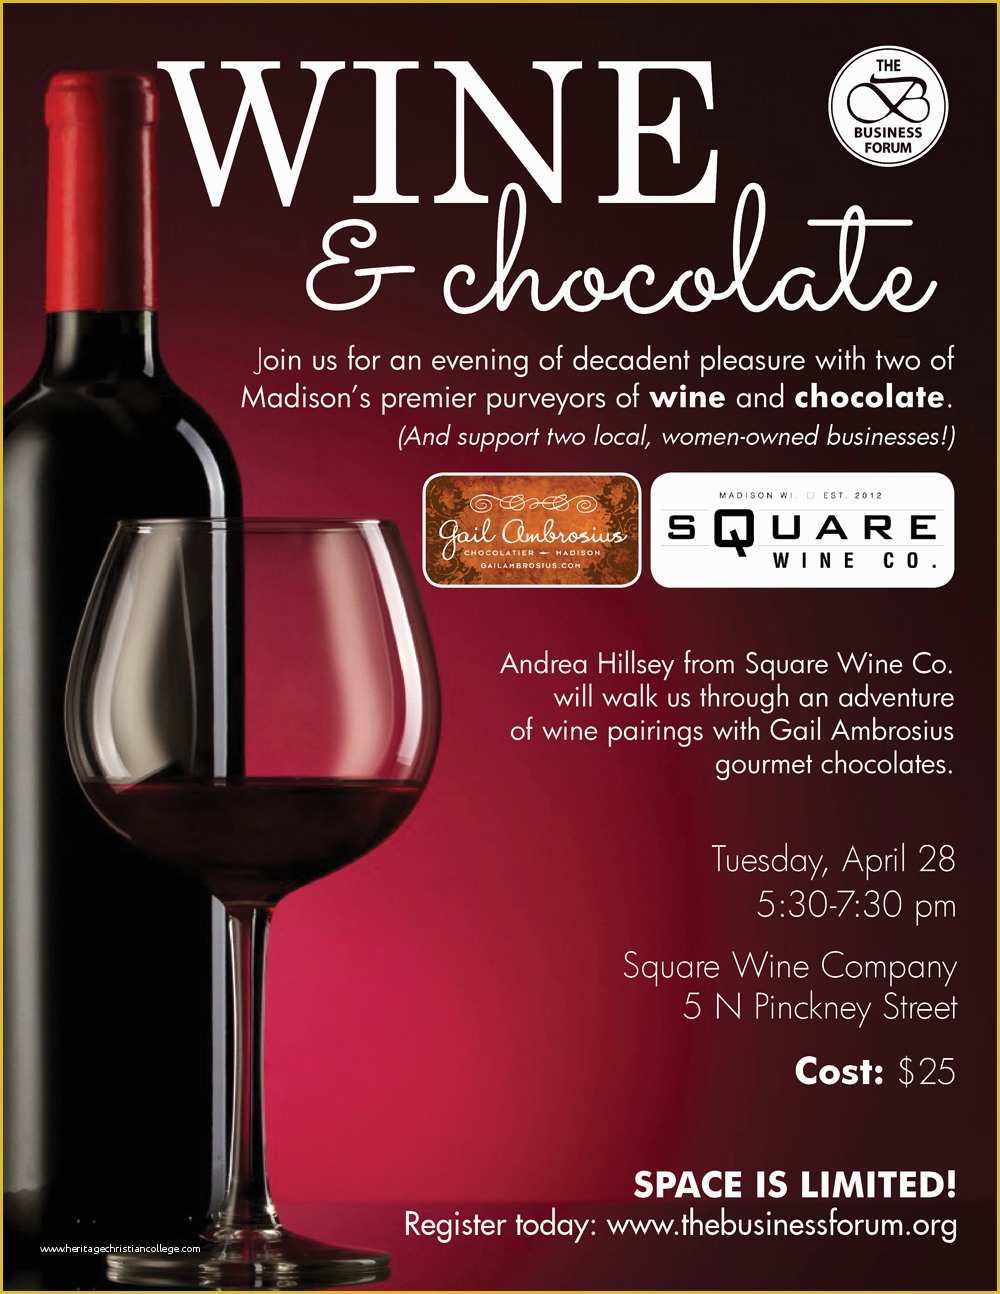 Wine Tasting event Flyer Template Free Of the Business forum Wine and Chocolate Tasting